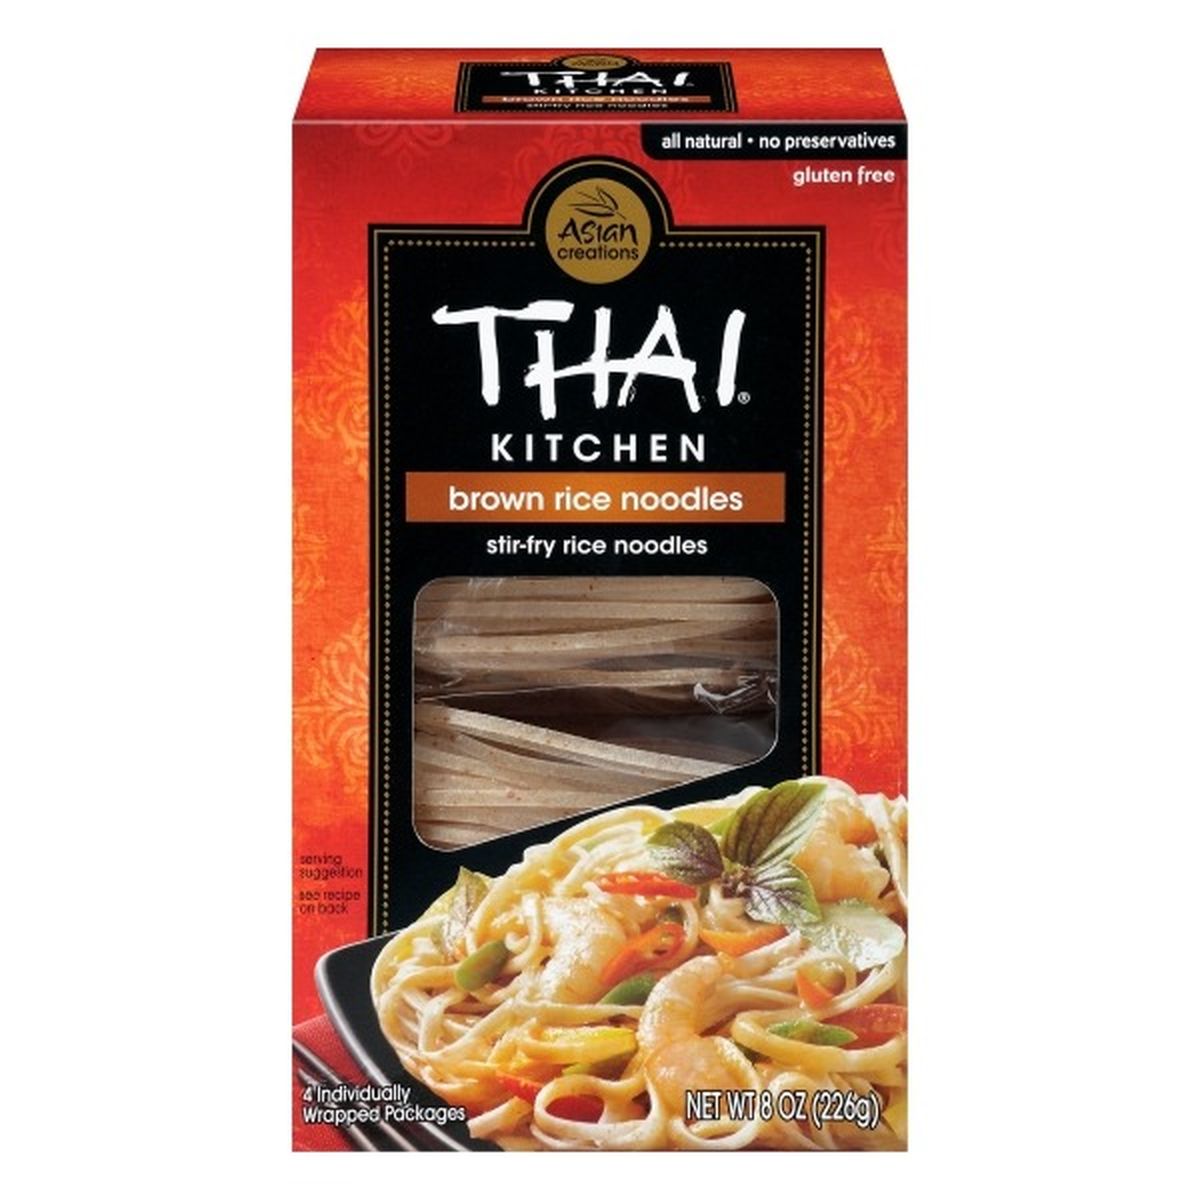 Calories in Thai Kitchens  Brown Rice Noodles